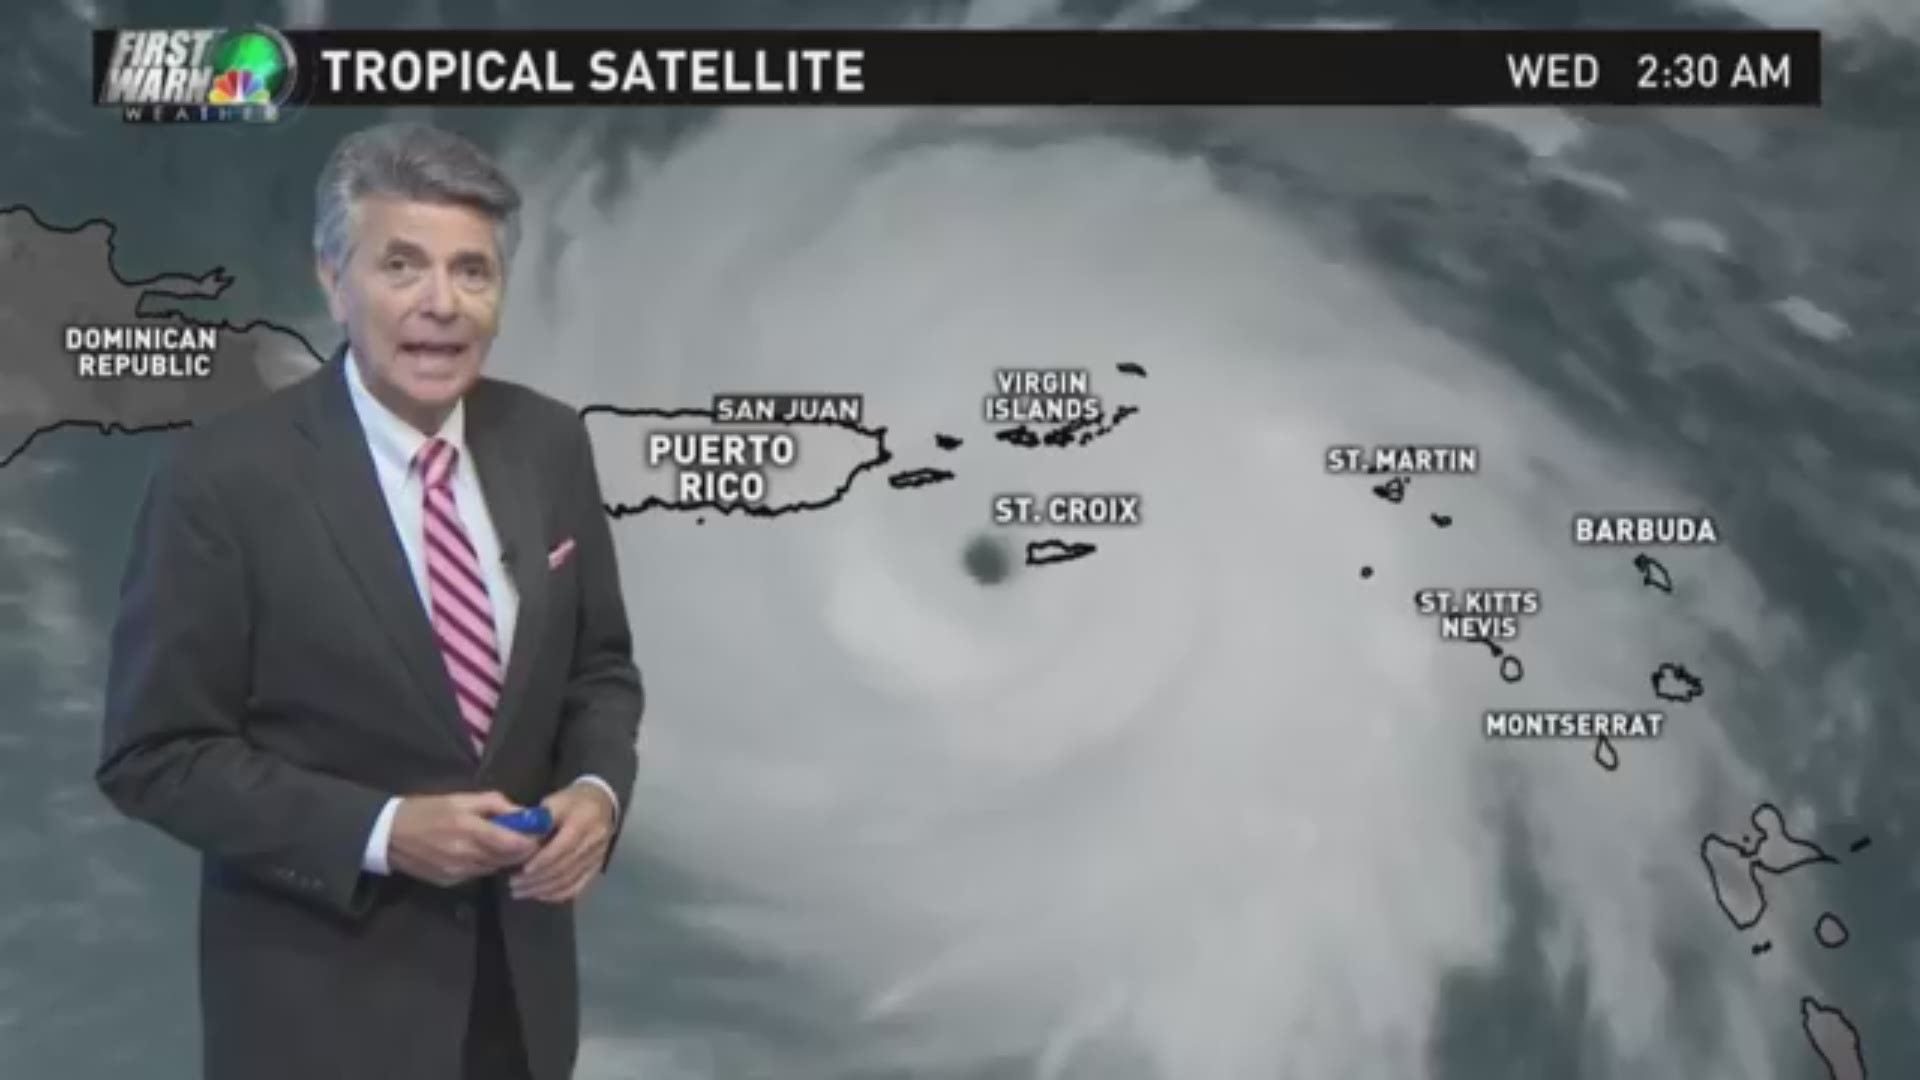 First Warn Storm Team forecaster Larry Sprinkle has the latest on Hurricane Maria after the storm made landfall in Puerto Rico.